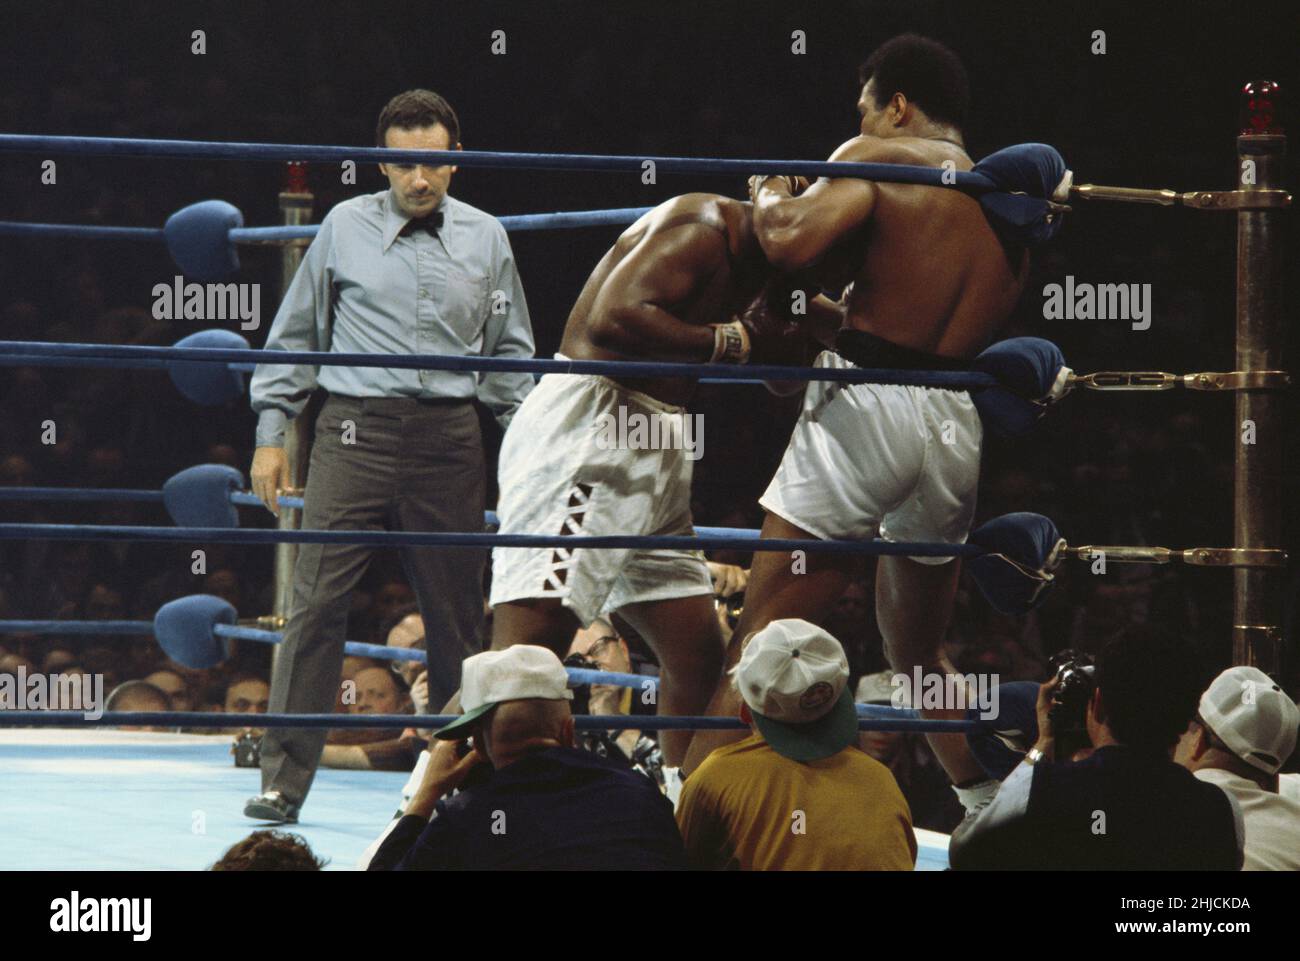 Muhammad Ali (born 1942) fighting Joe Frazier (born 1944) on March 8, 1971 at Madison Square Garden, New York City.  The "Fight of the Century" was a match between champion Frazier and challenger Ali.  Frazier won. Stock Photo